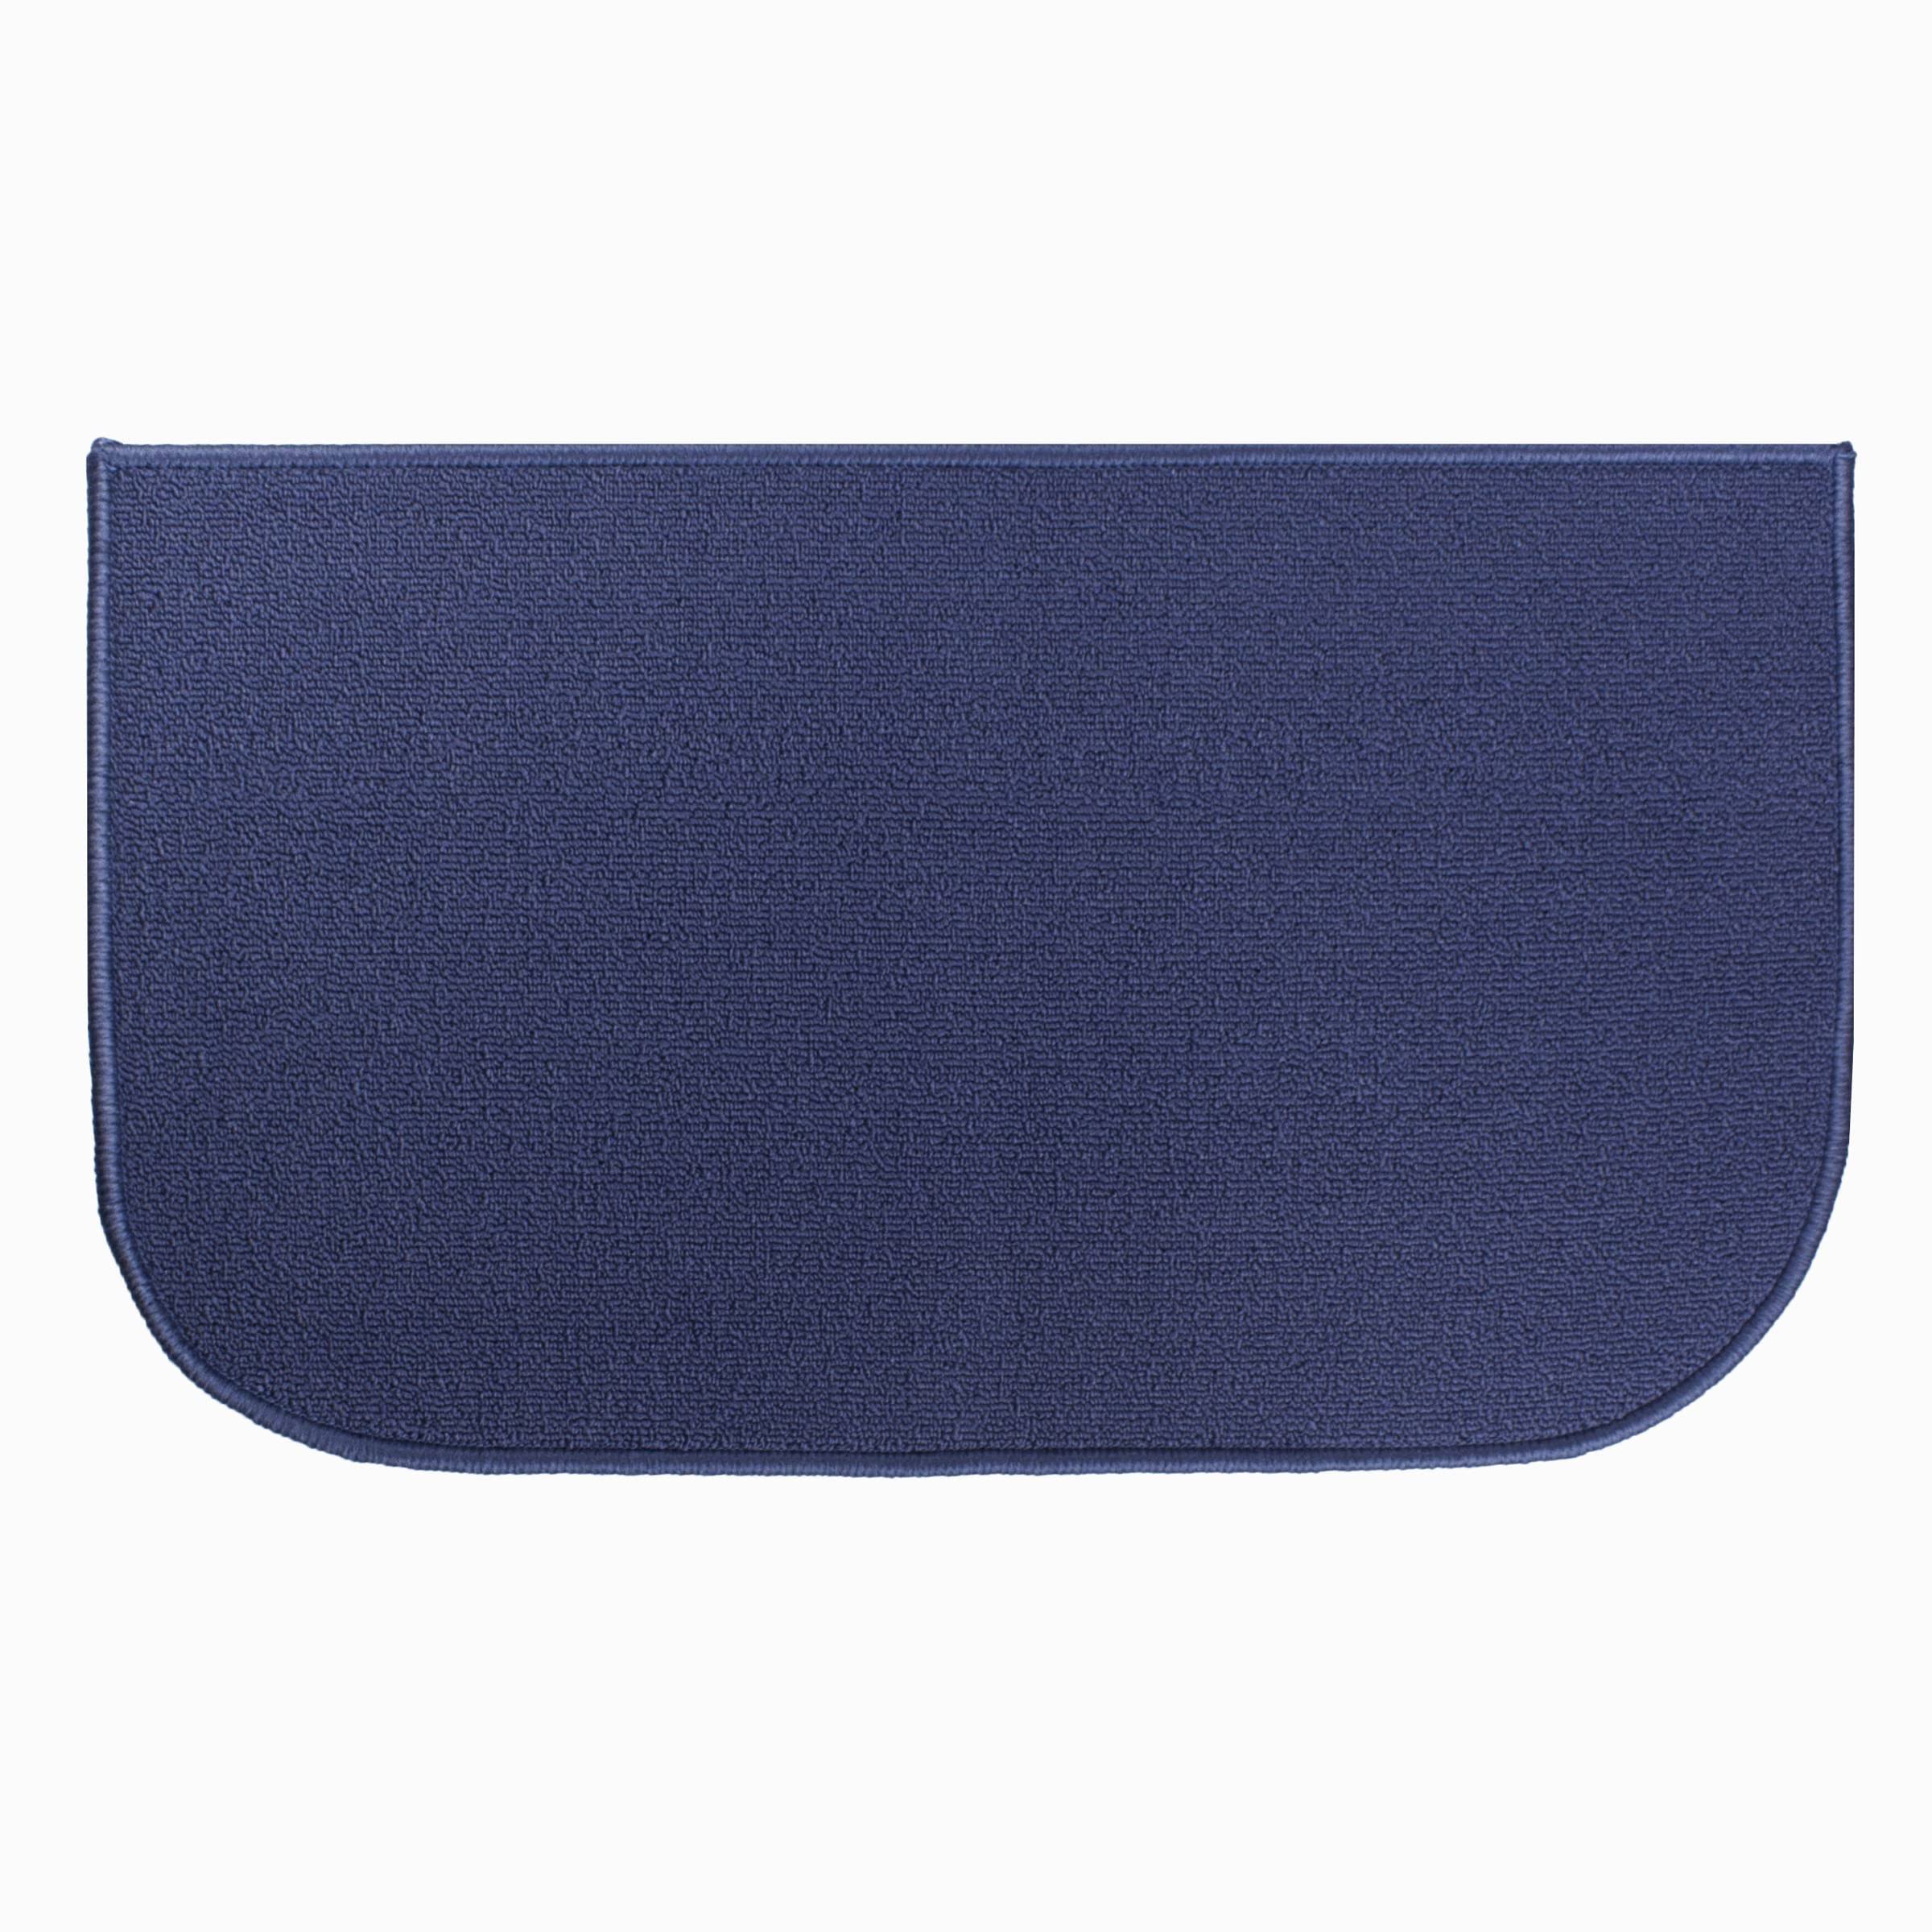 Ritz Accent Rug with Latex Backing - Blue, 18"x30"